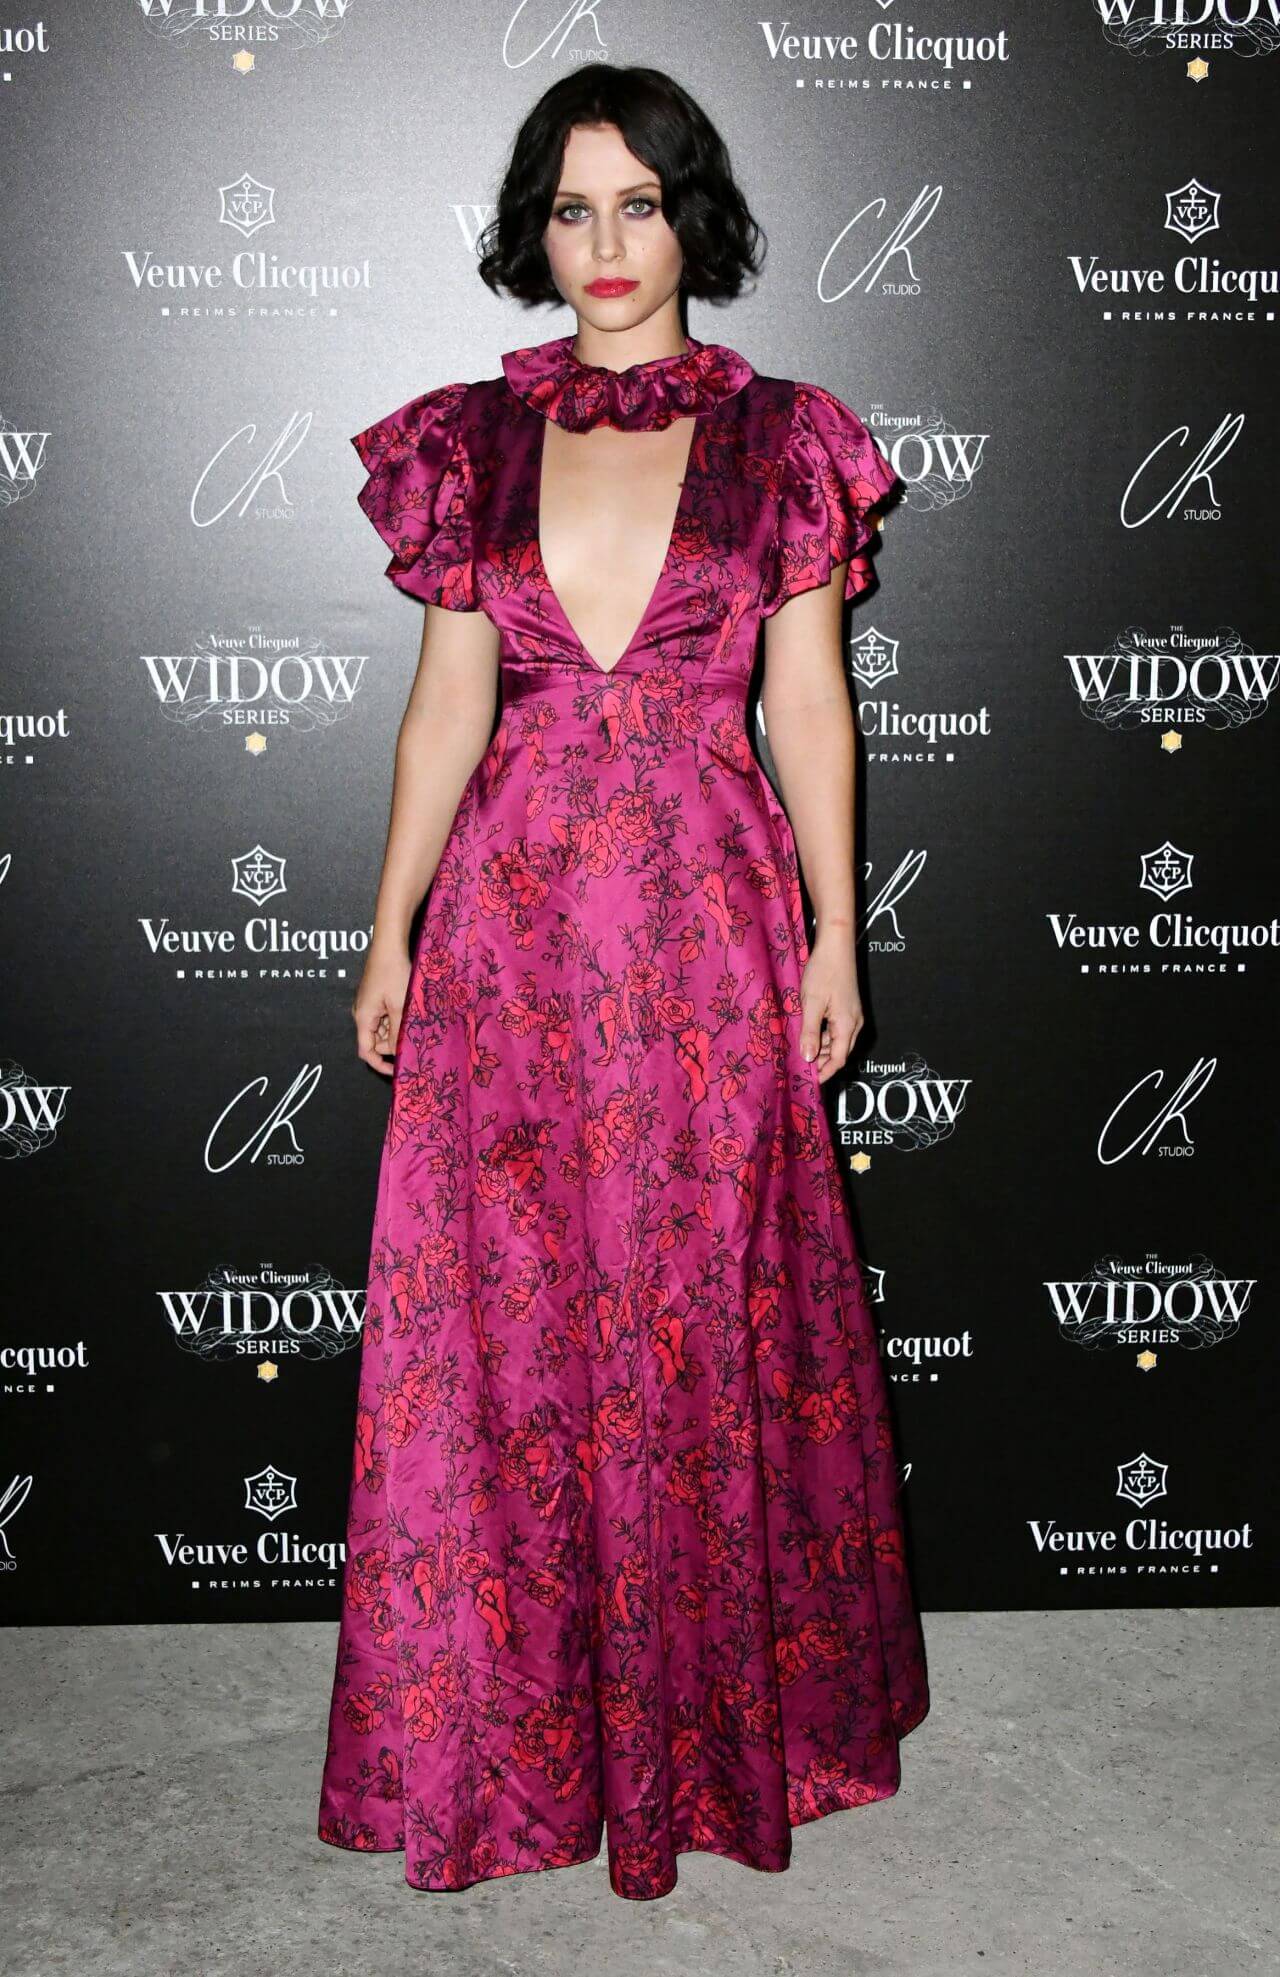 Billie JD Porter  In Pink Floral Printed V Neckline Pleated  Long Gown At The Veuve Clicquot Widow Series VIP Launch Party in London